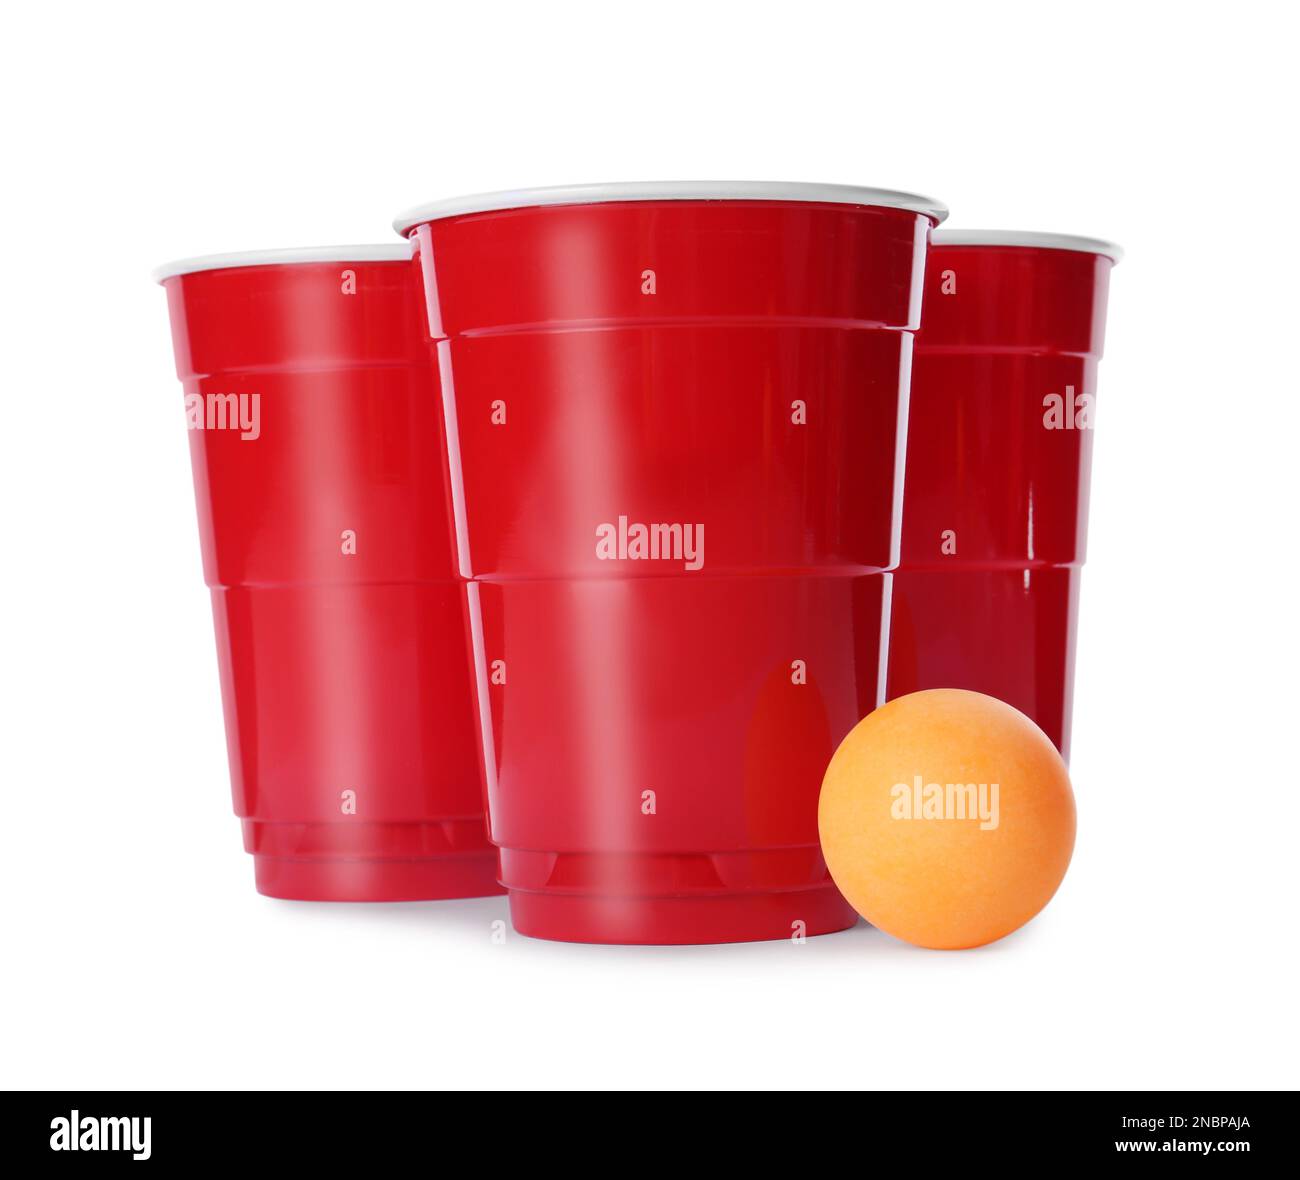 https://c8.alamy.com/comp/2NBPAJA/red-plastic-cups-and-ball-for-beer-pong-on-white-background-2NBPAJA.jpg